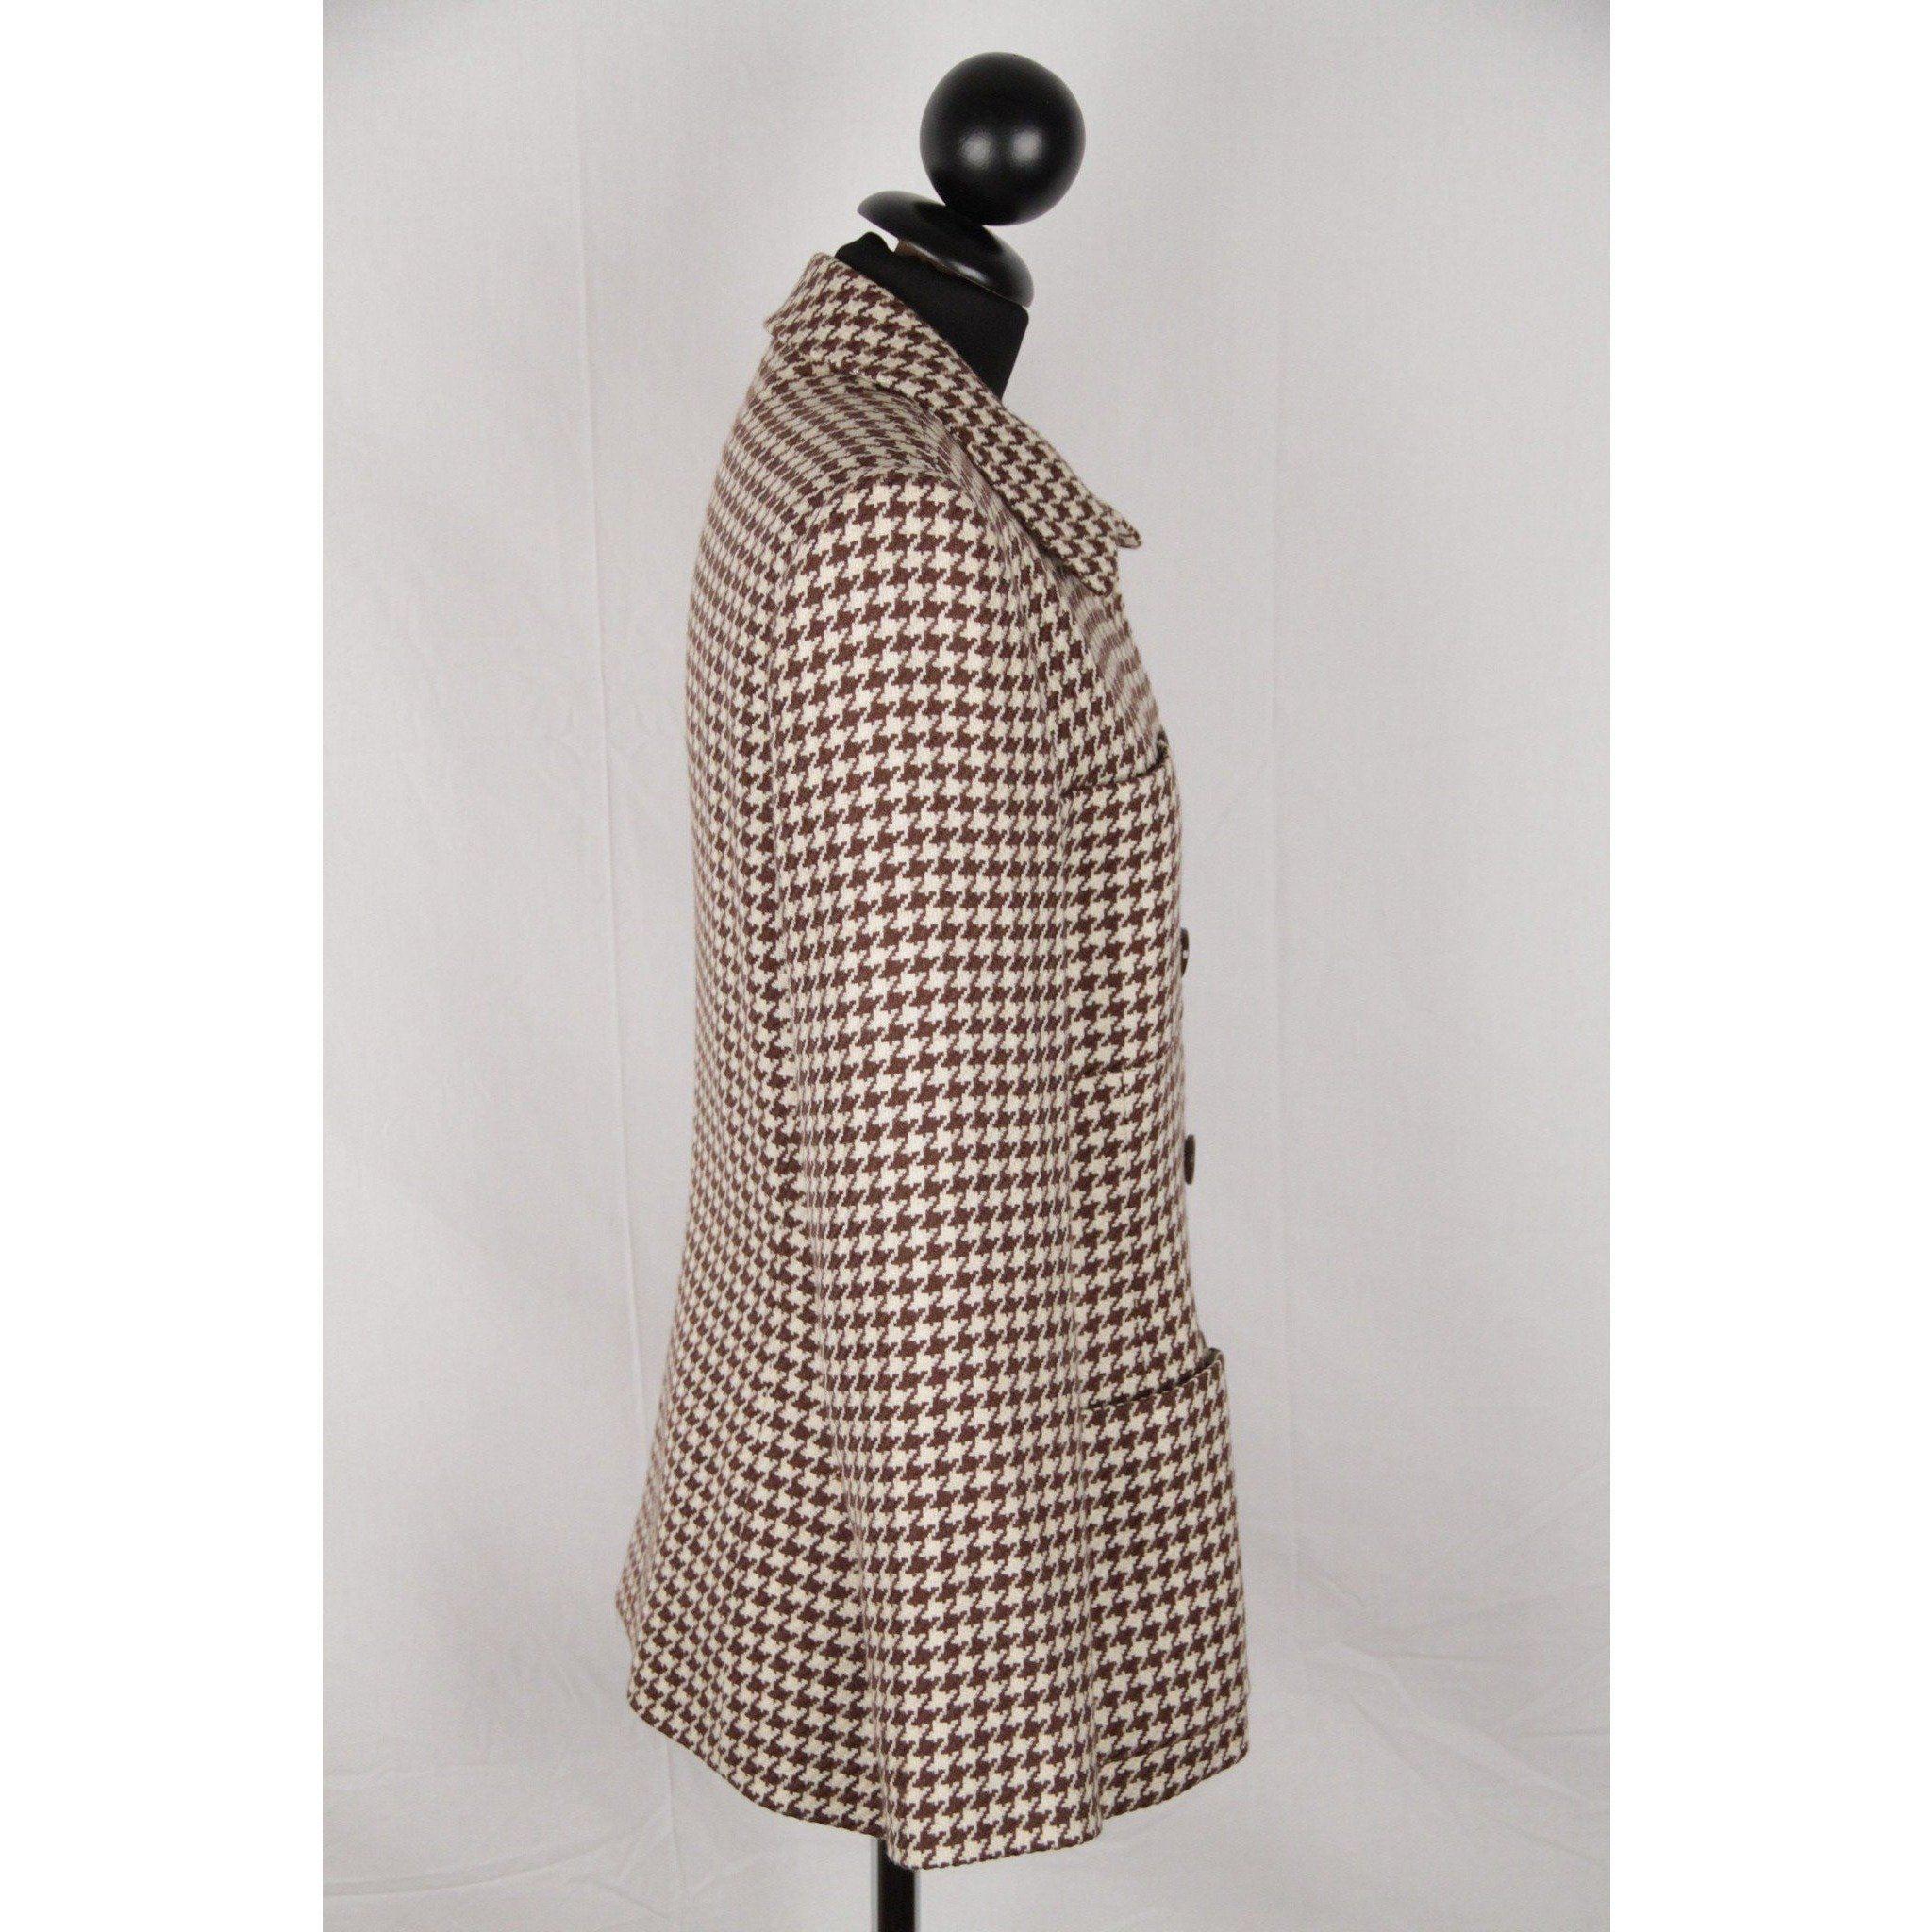 - White & brown Houndstooth pattern - Long sleeve styling - Shirt collar - Composition tag is missing! It seems to be wool and cashemere - Button closure on the front - 2 patch pockets on the chest and 2 patch pockets on the hips - Lined interior -